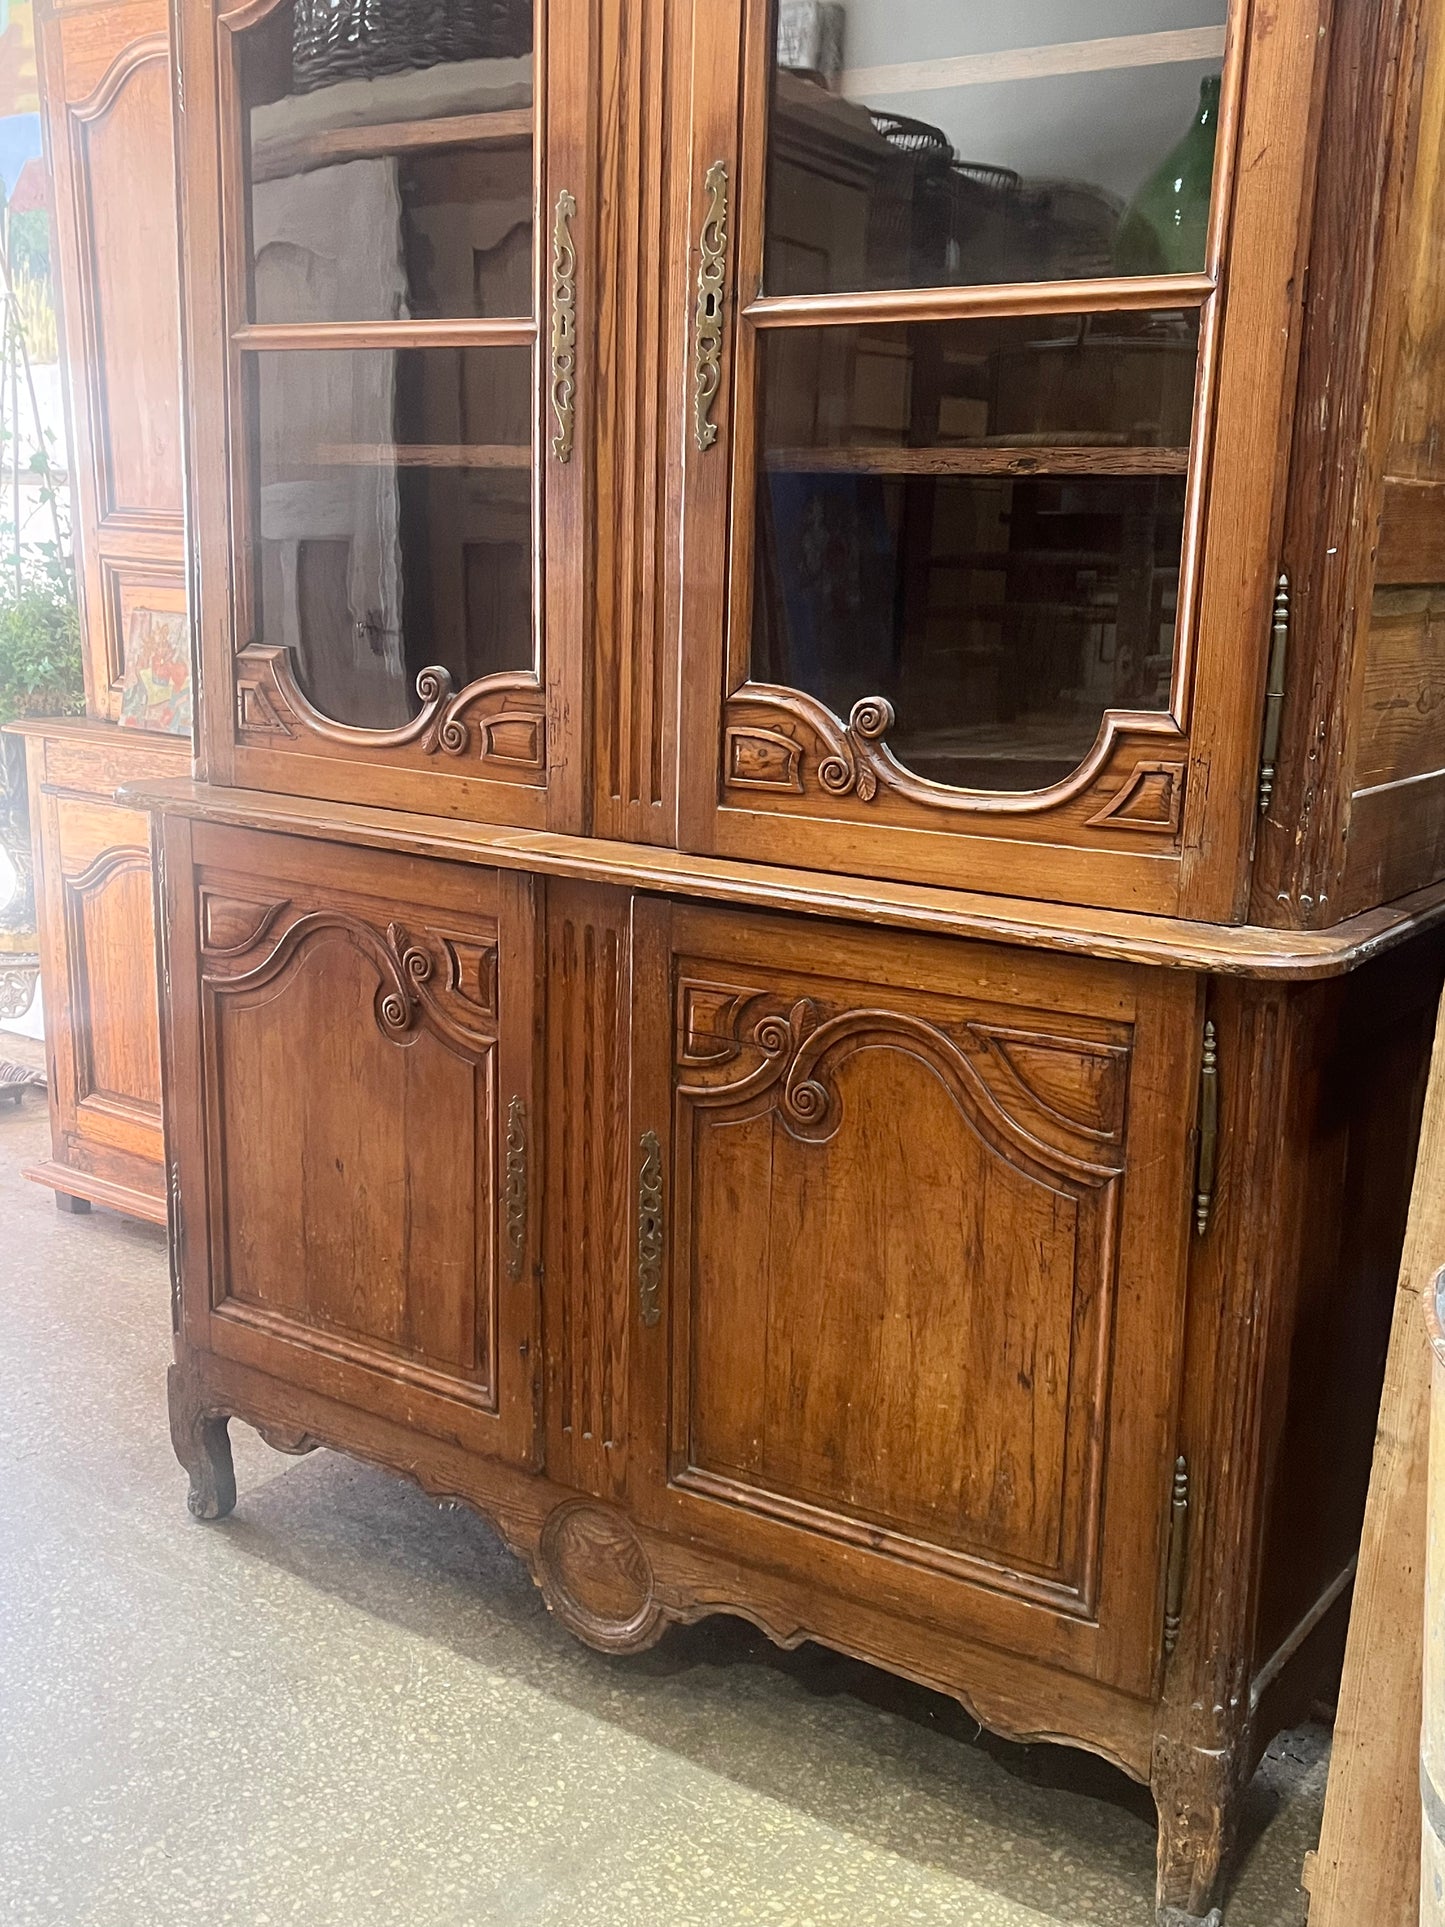 A French antique book case